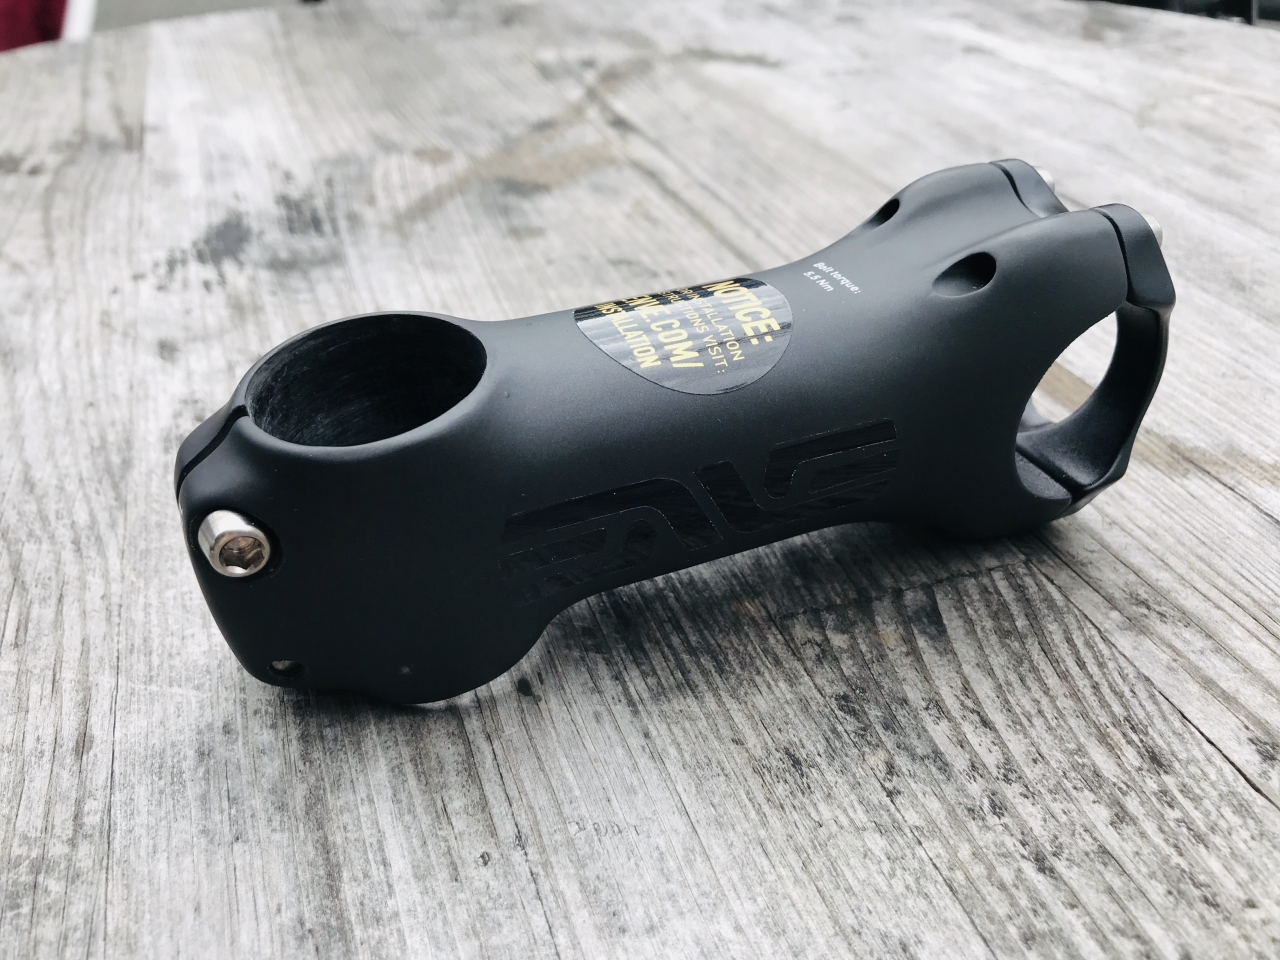 ENVE カーボンステム取り付けしました！ - Climb cycle sports